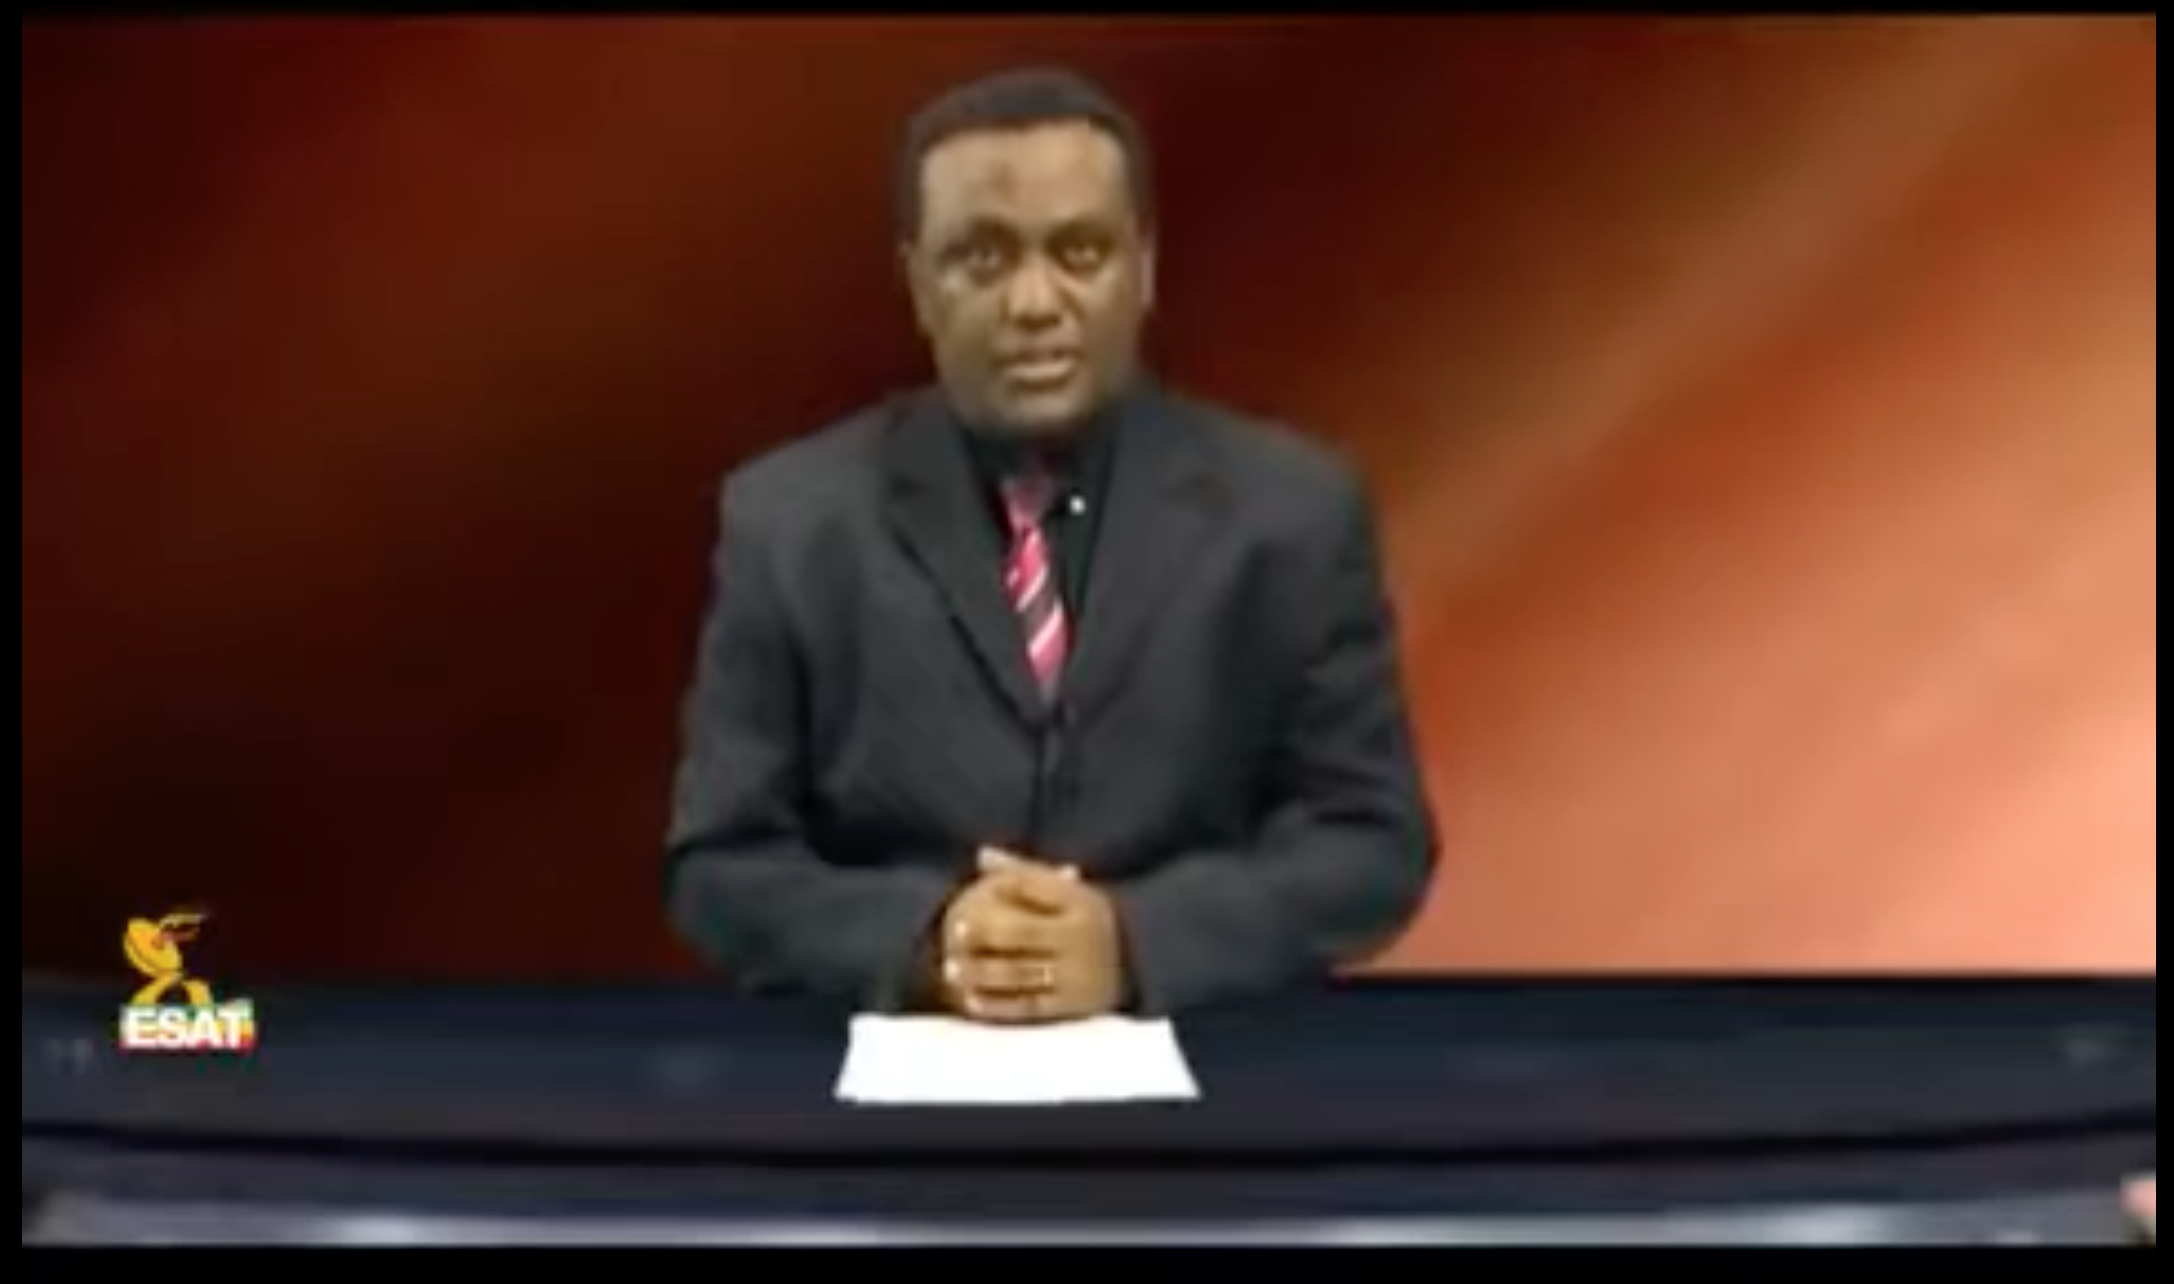 “Drain the Sea”: The Genocidal Call Broadcast by ESAT